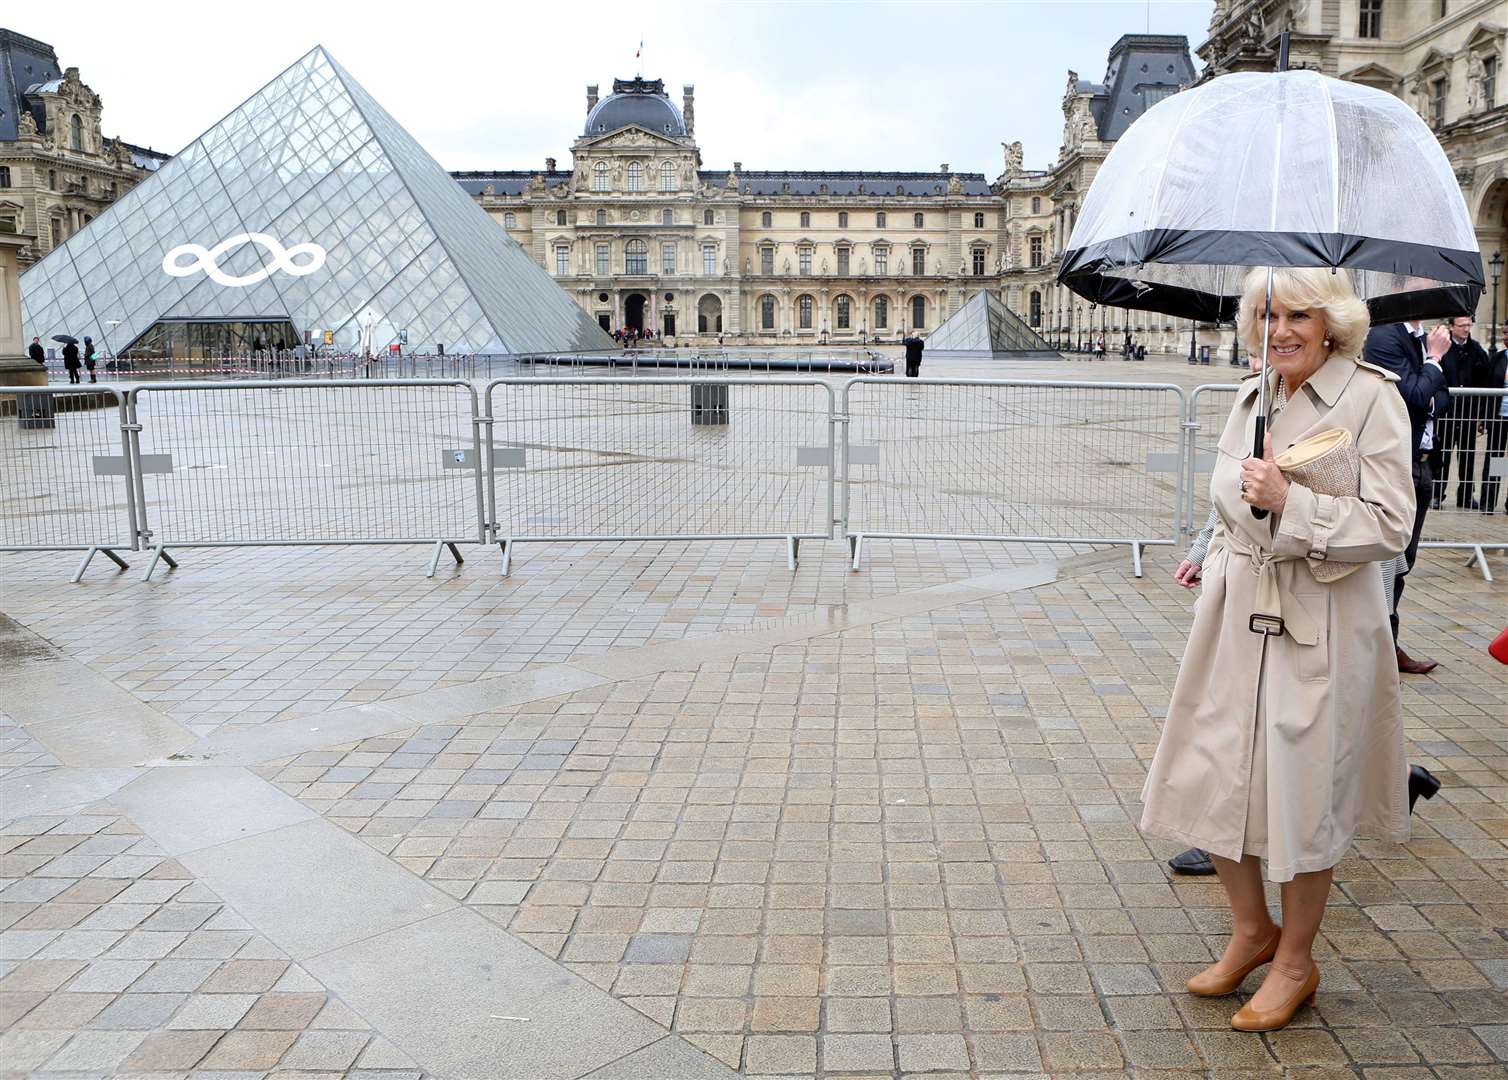 Camilla during a previous visit to the Louvre Museum in Paris (Chris Radburn/PA)